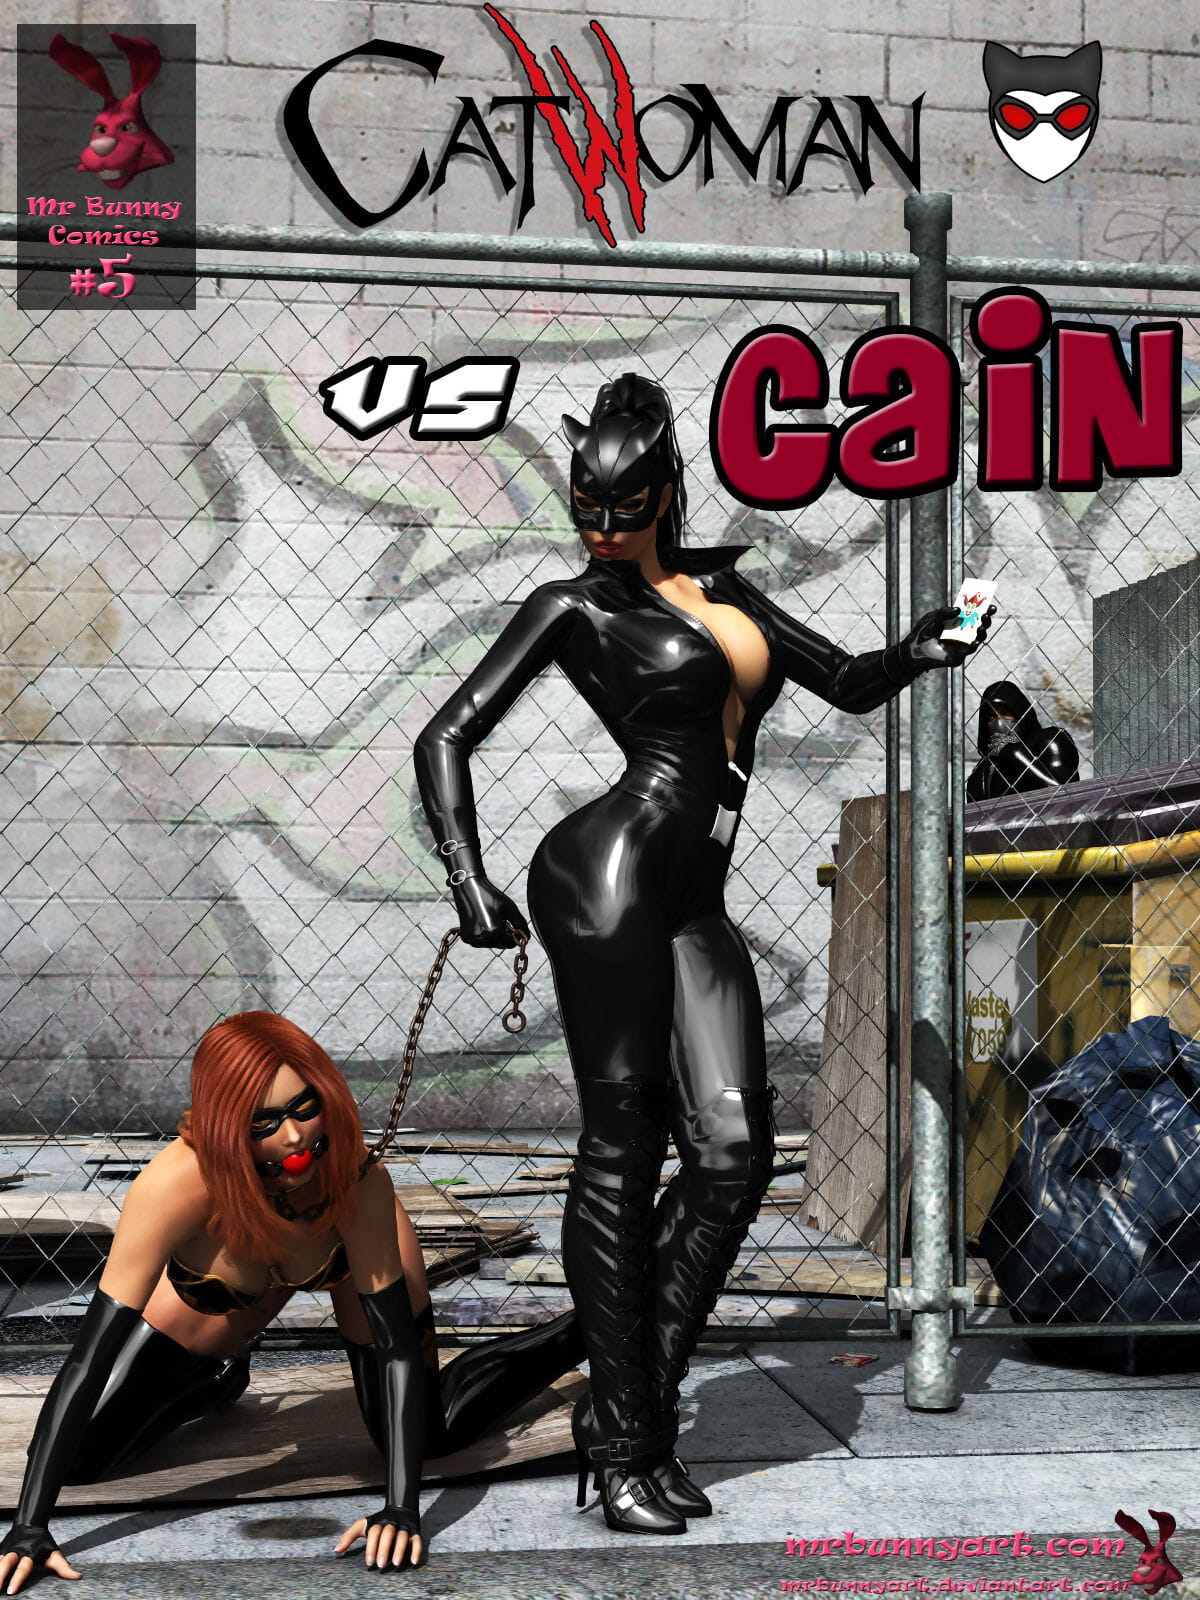 Cain vs Catwoman page 1